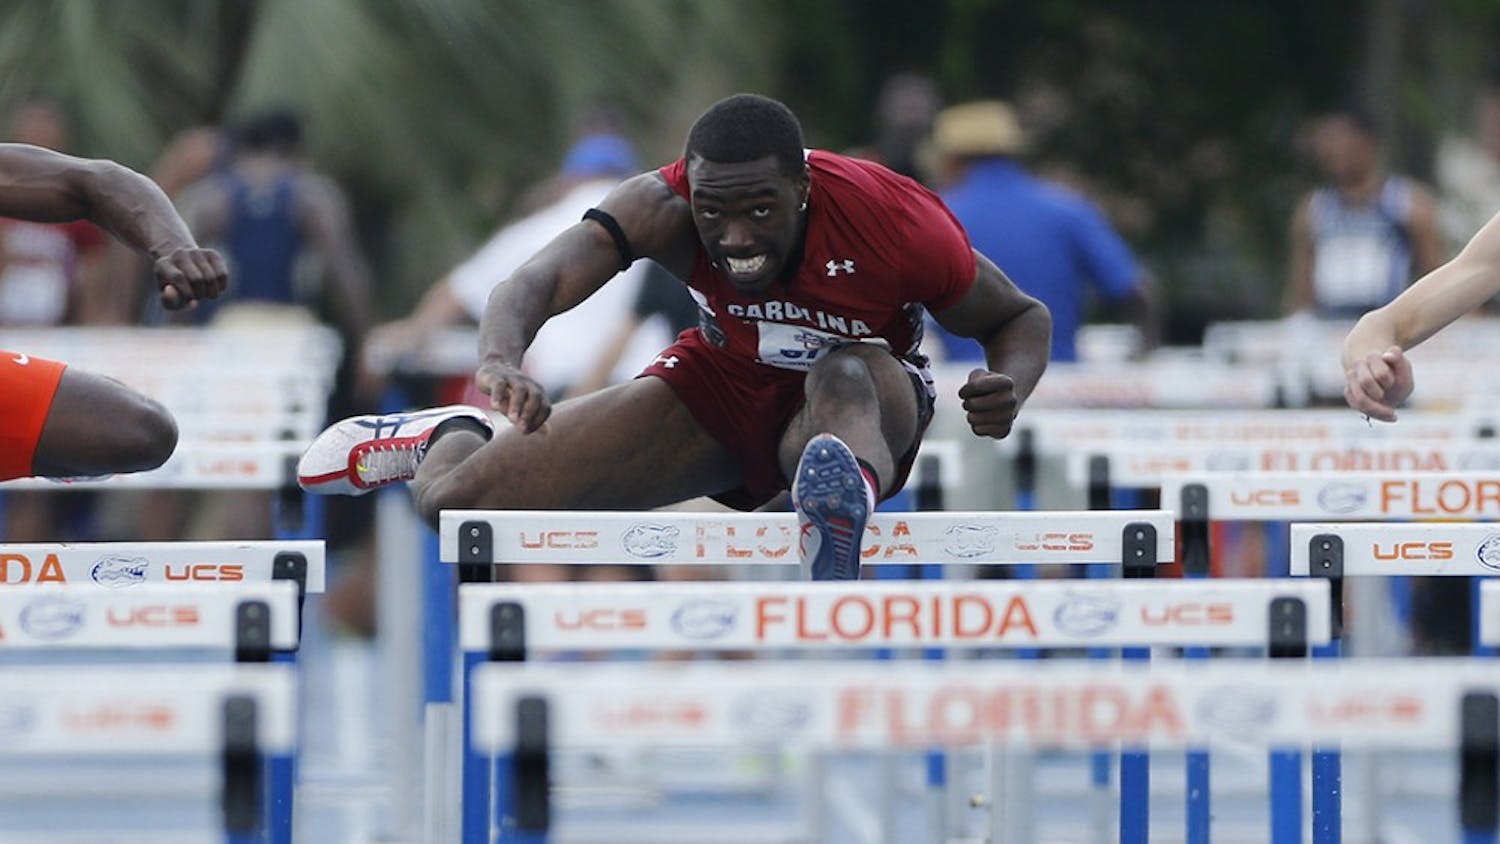  during the Pepsi Florida Relays on Friday, April 3, 2015 at Percy Beard Track at James G. Pressly Stadium in Gainesville, FL / UAA Communications photo by Tim Casey